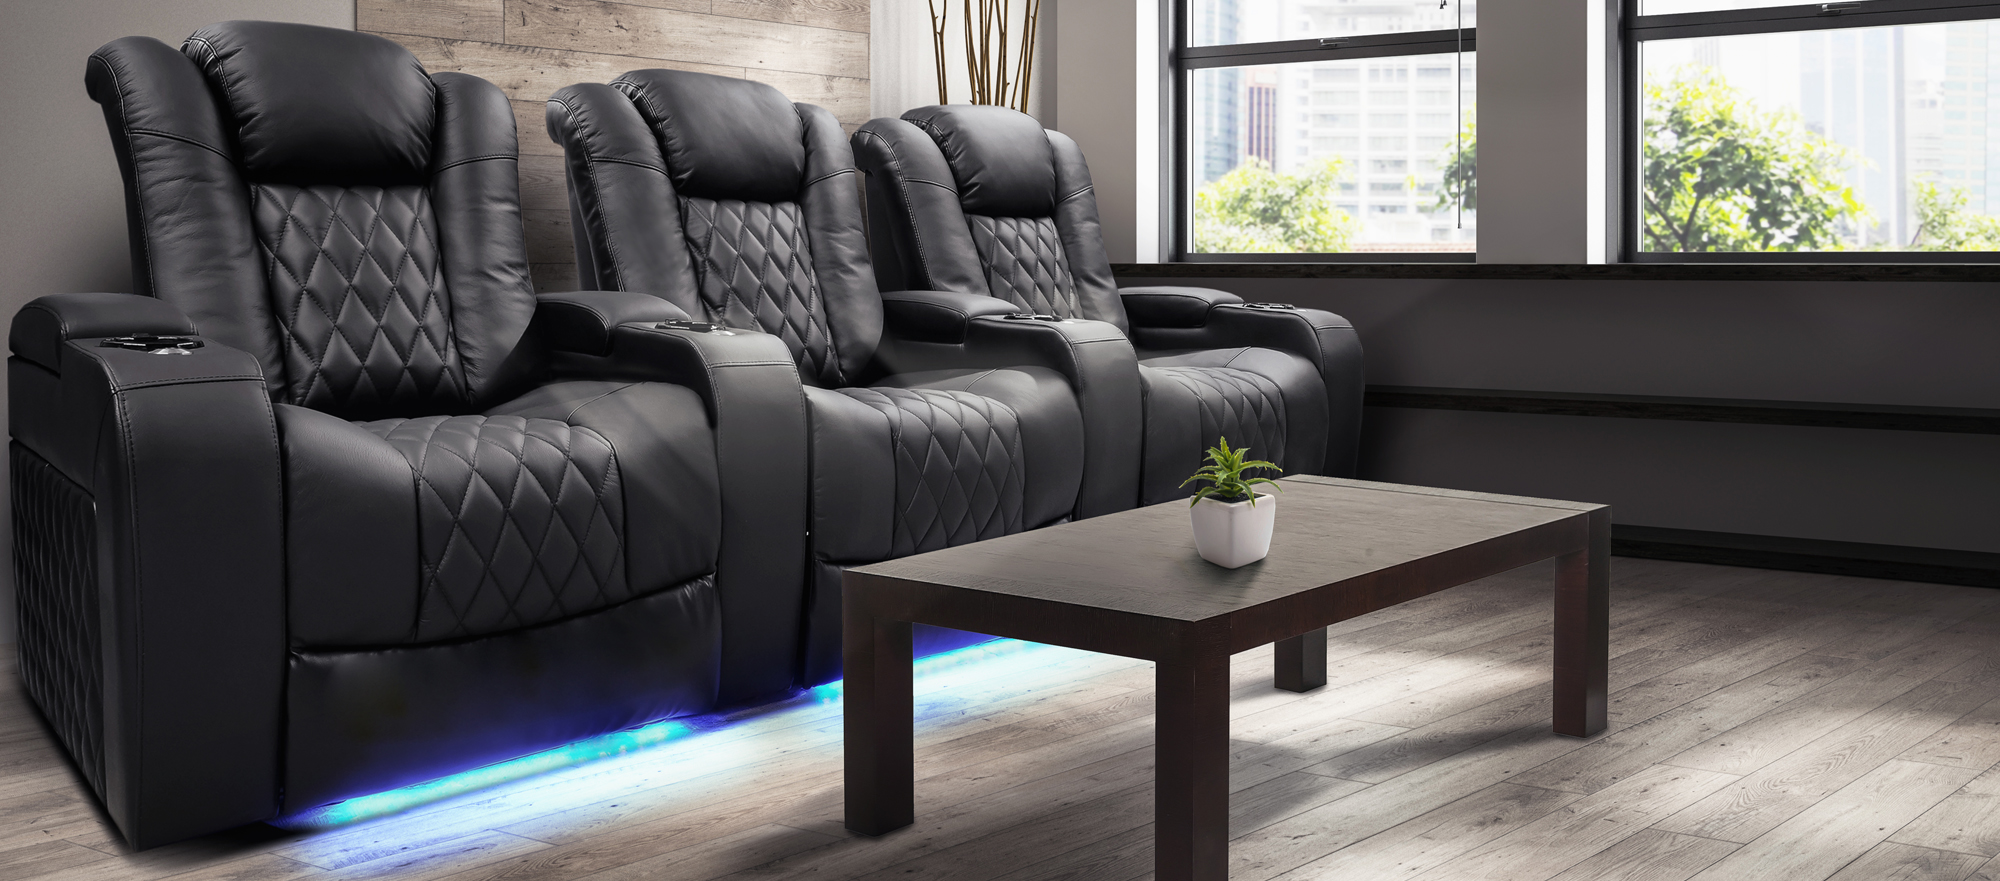 Electric Recliner Sofa Chair Luxury Leather Wall Hugger Home Theater Seat w/ USB 